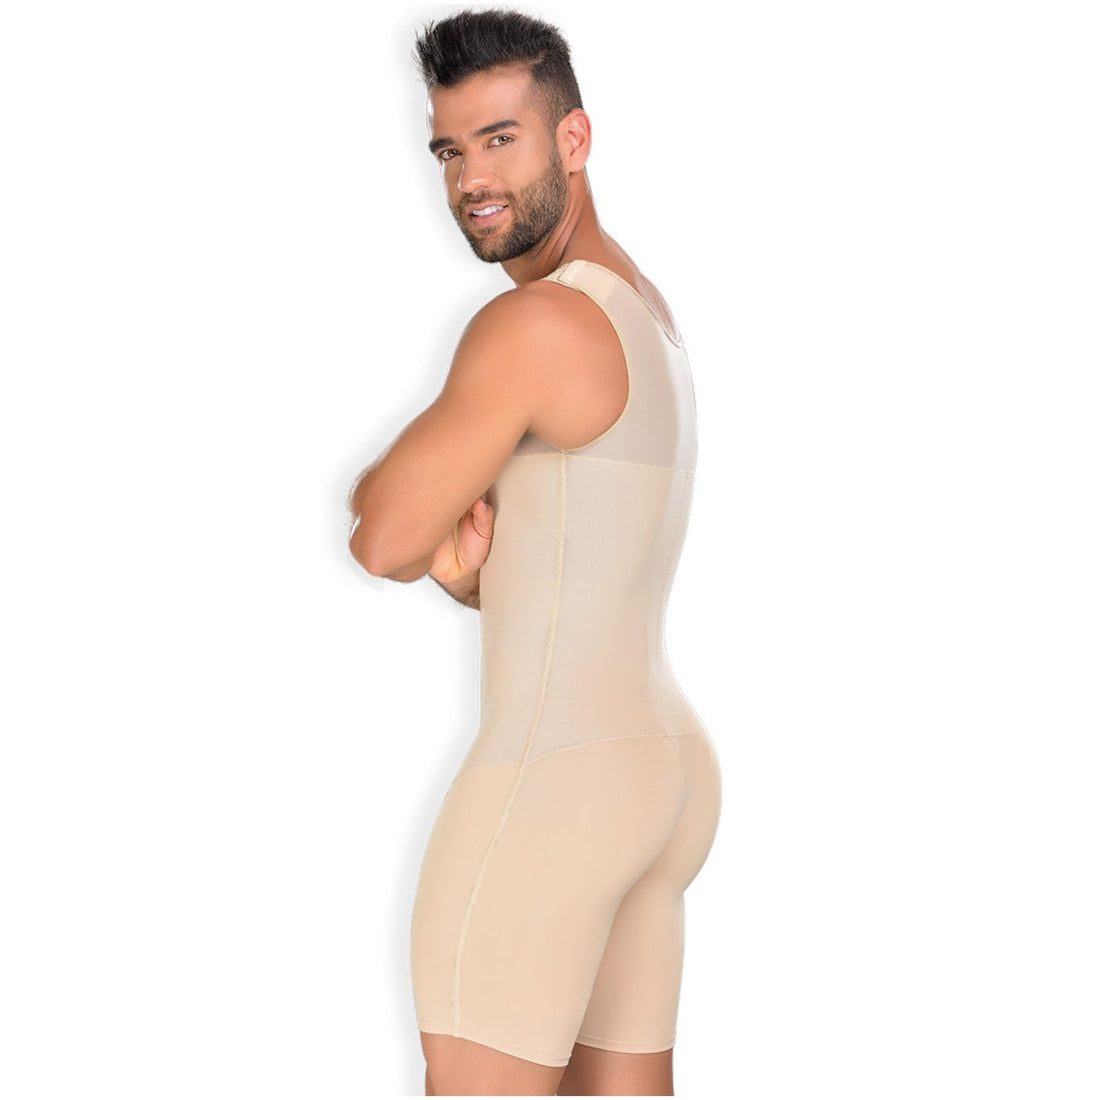 Fajas MYD 0061 Slimming Body Shaper for Men / Powernet/Post Surgical - ImSoCheeky